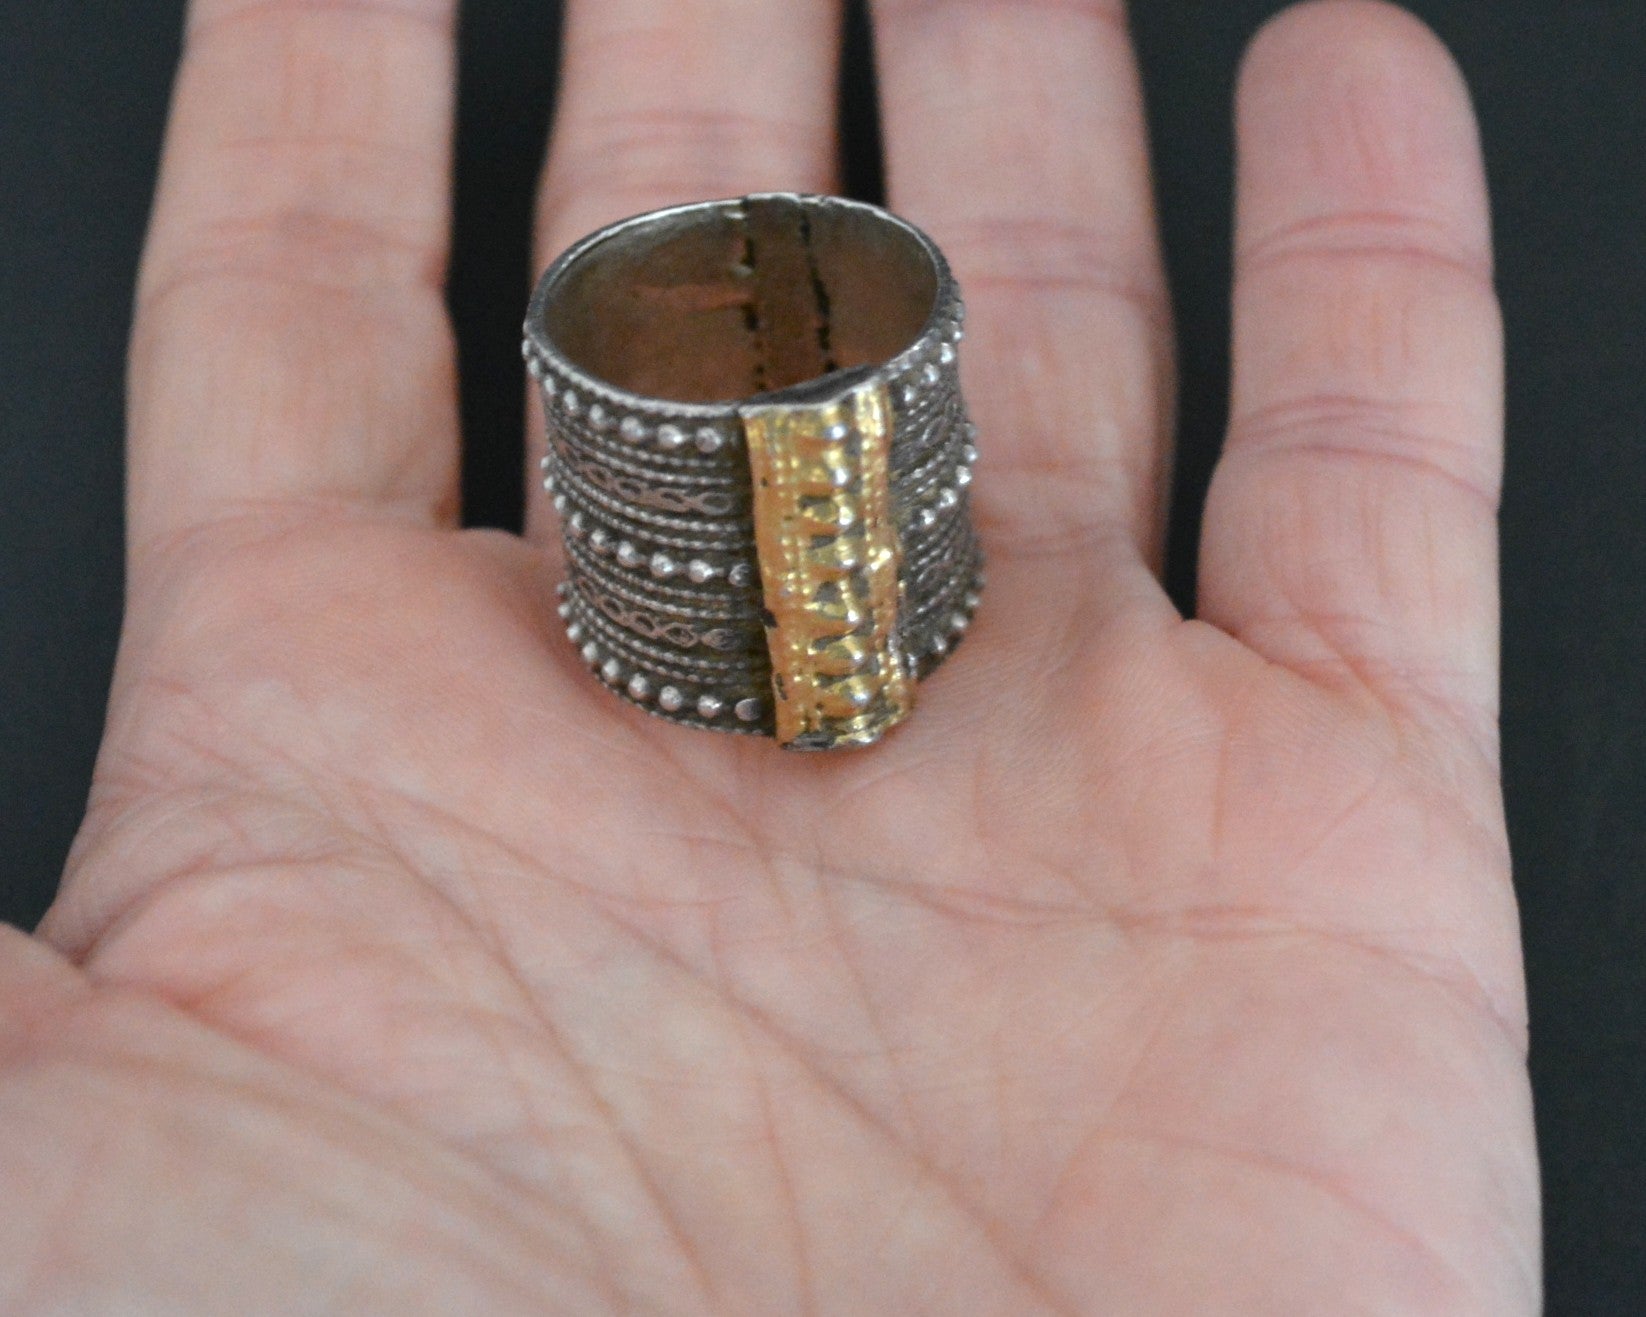 Antique Omani Silver Ring with Gilding - Size 9